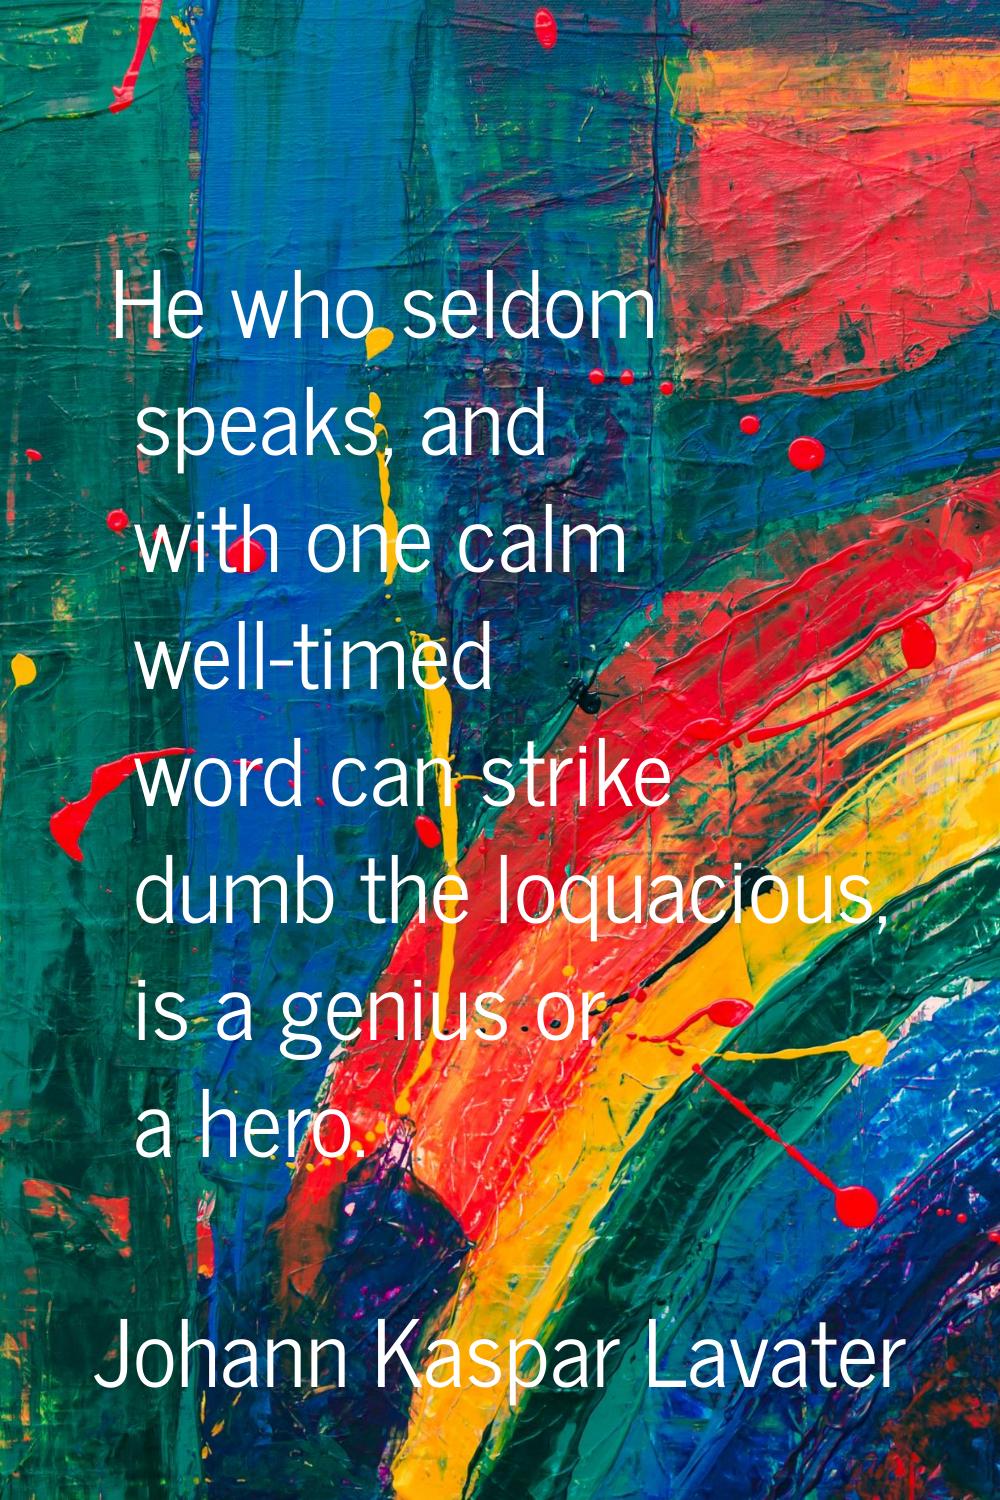 He who seldom speaks, and with one calm well-timed word can strike dumb the loquacious, is a genius